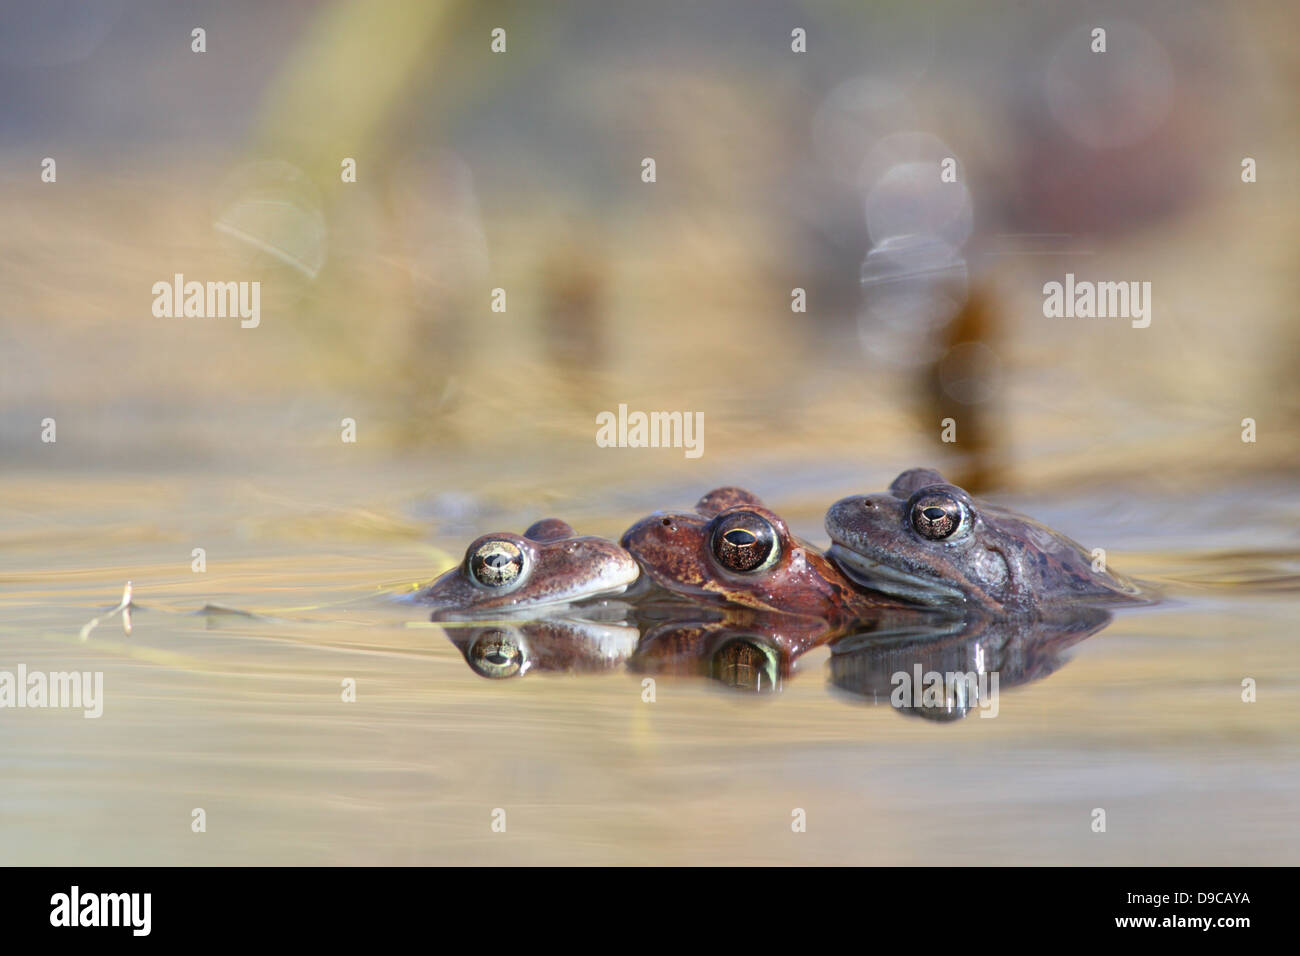 Mating common frogs (Rana temporaria) in spring. Stock Photo